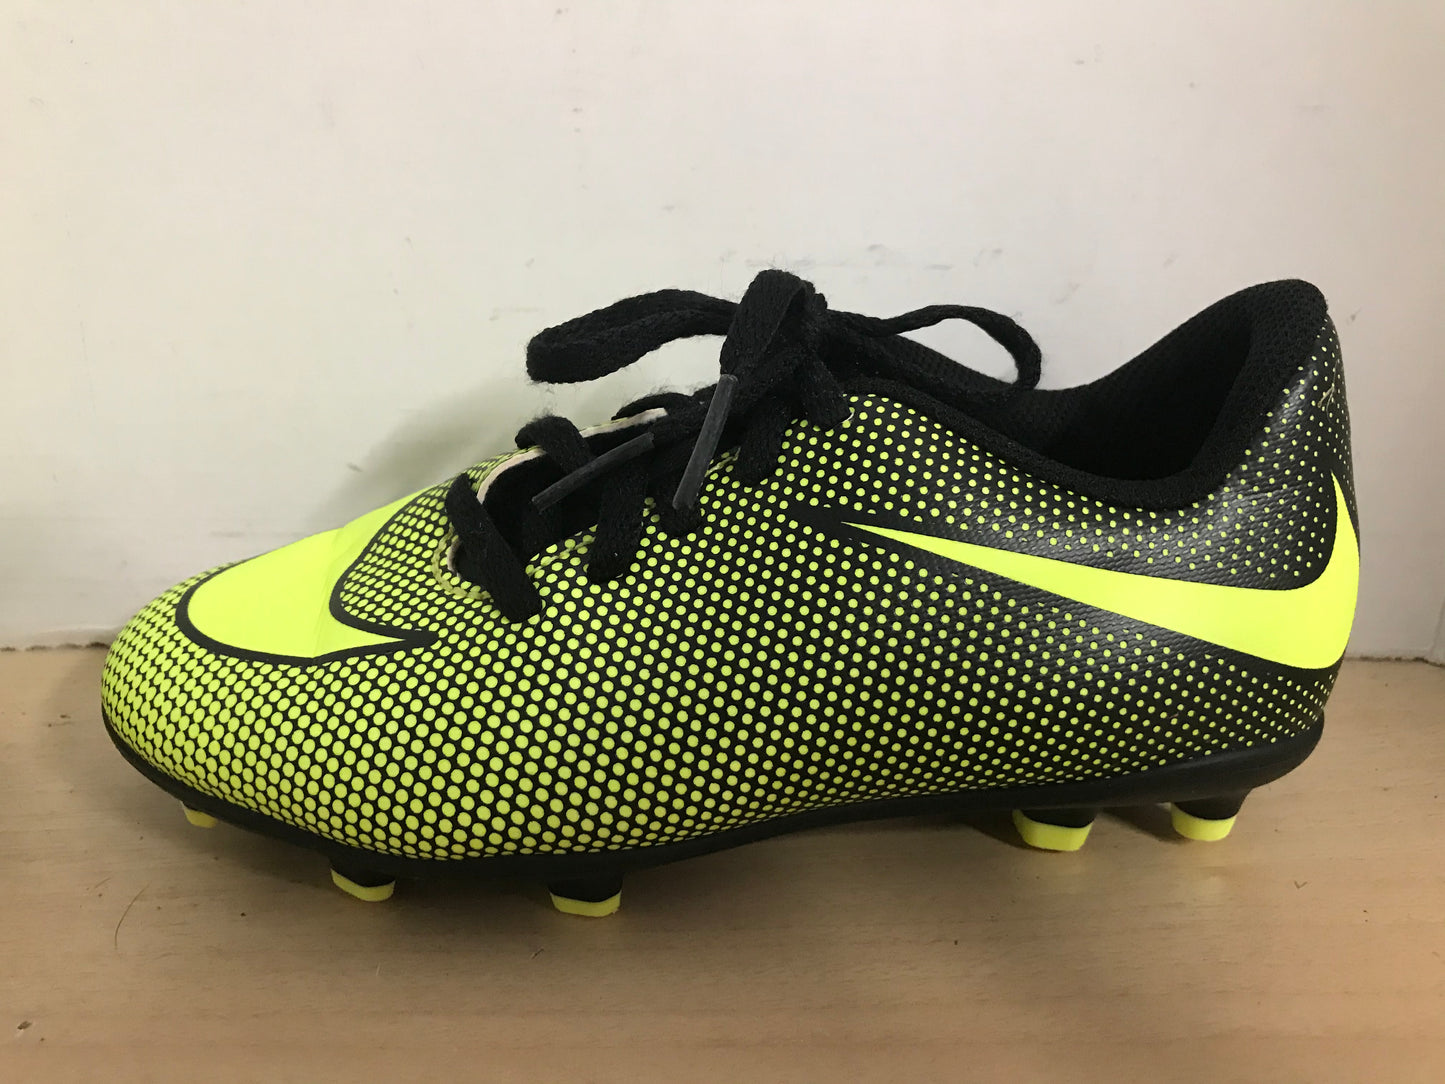 Soccer Shoes Cleats Child Size 13 Nike Black Lime Excellent